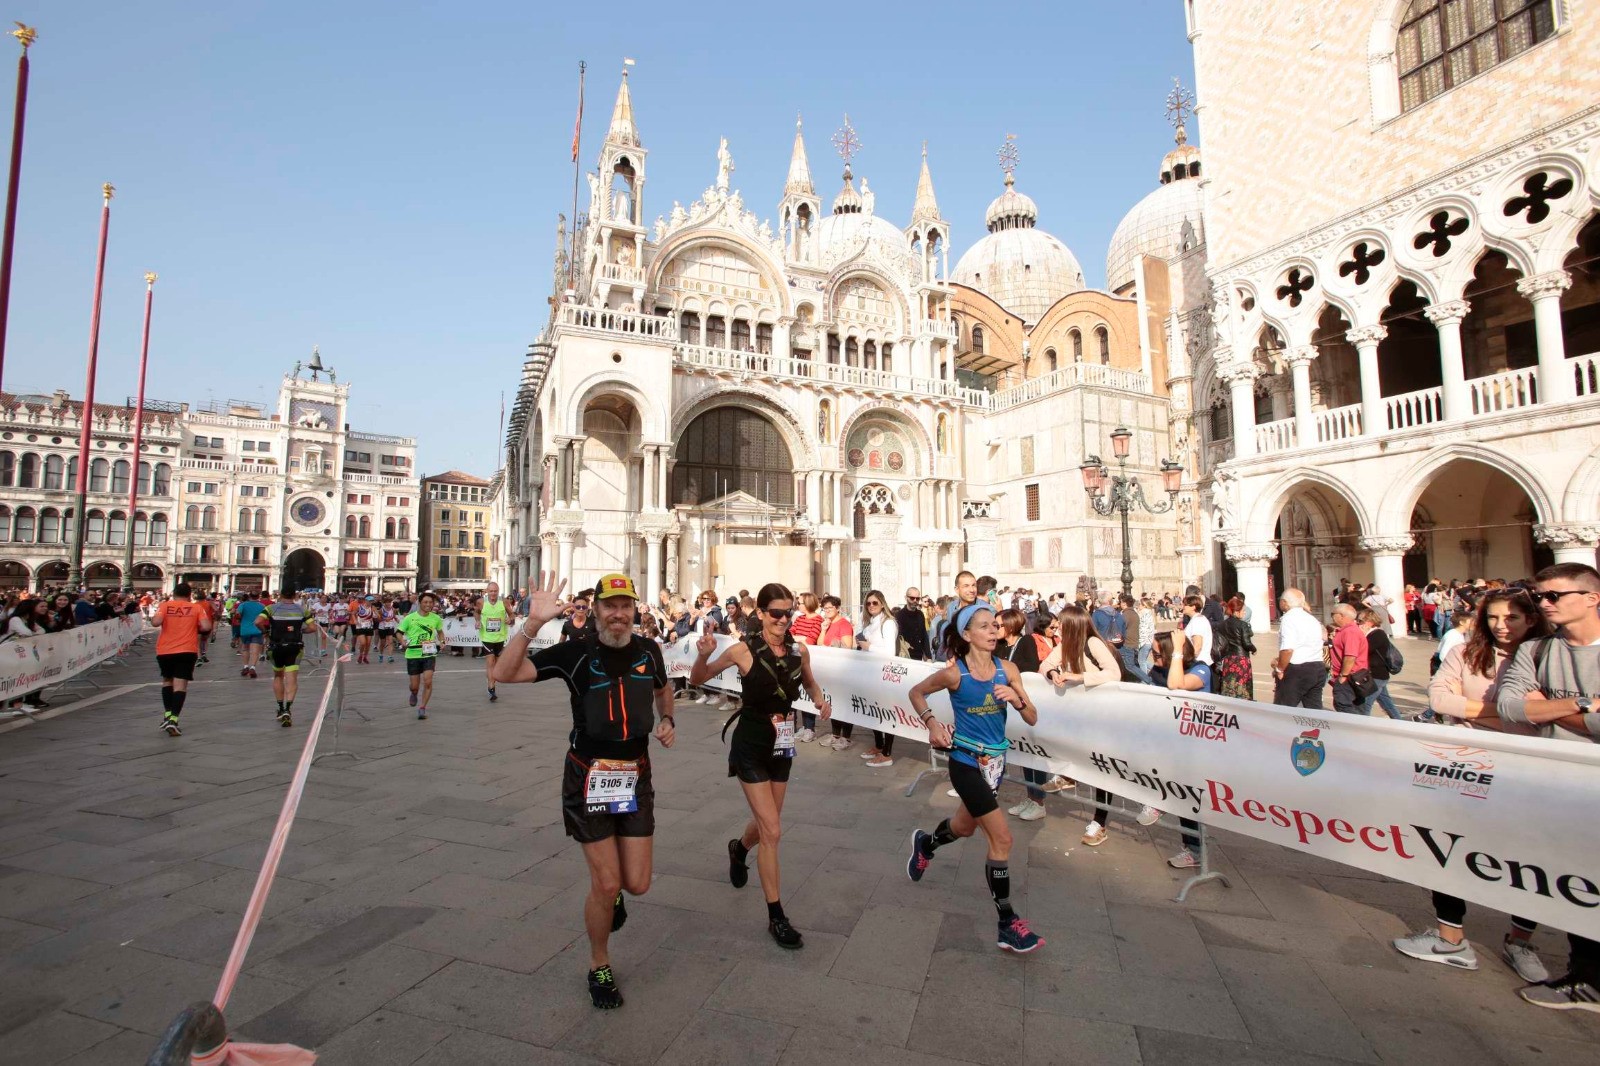 Venice Marathon 2021: the event that brings together runners from all over the world in our city